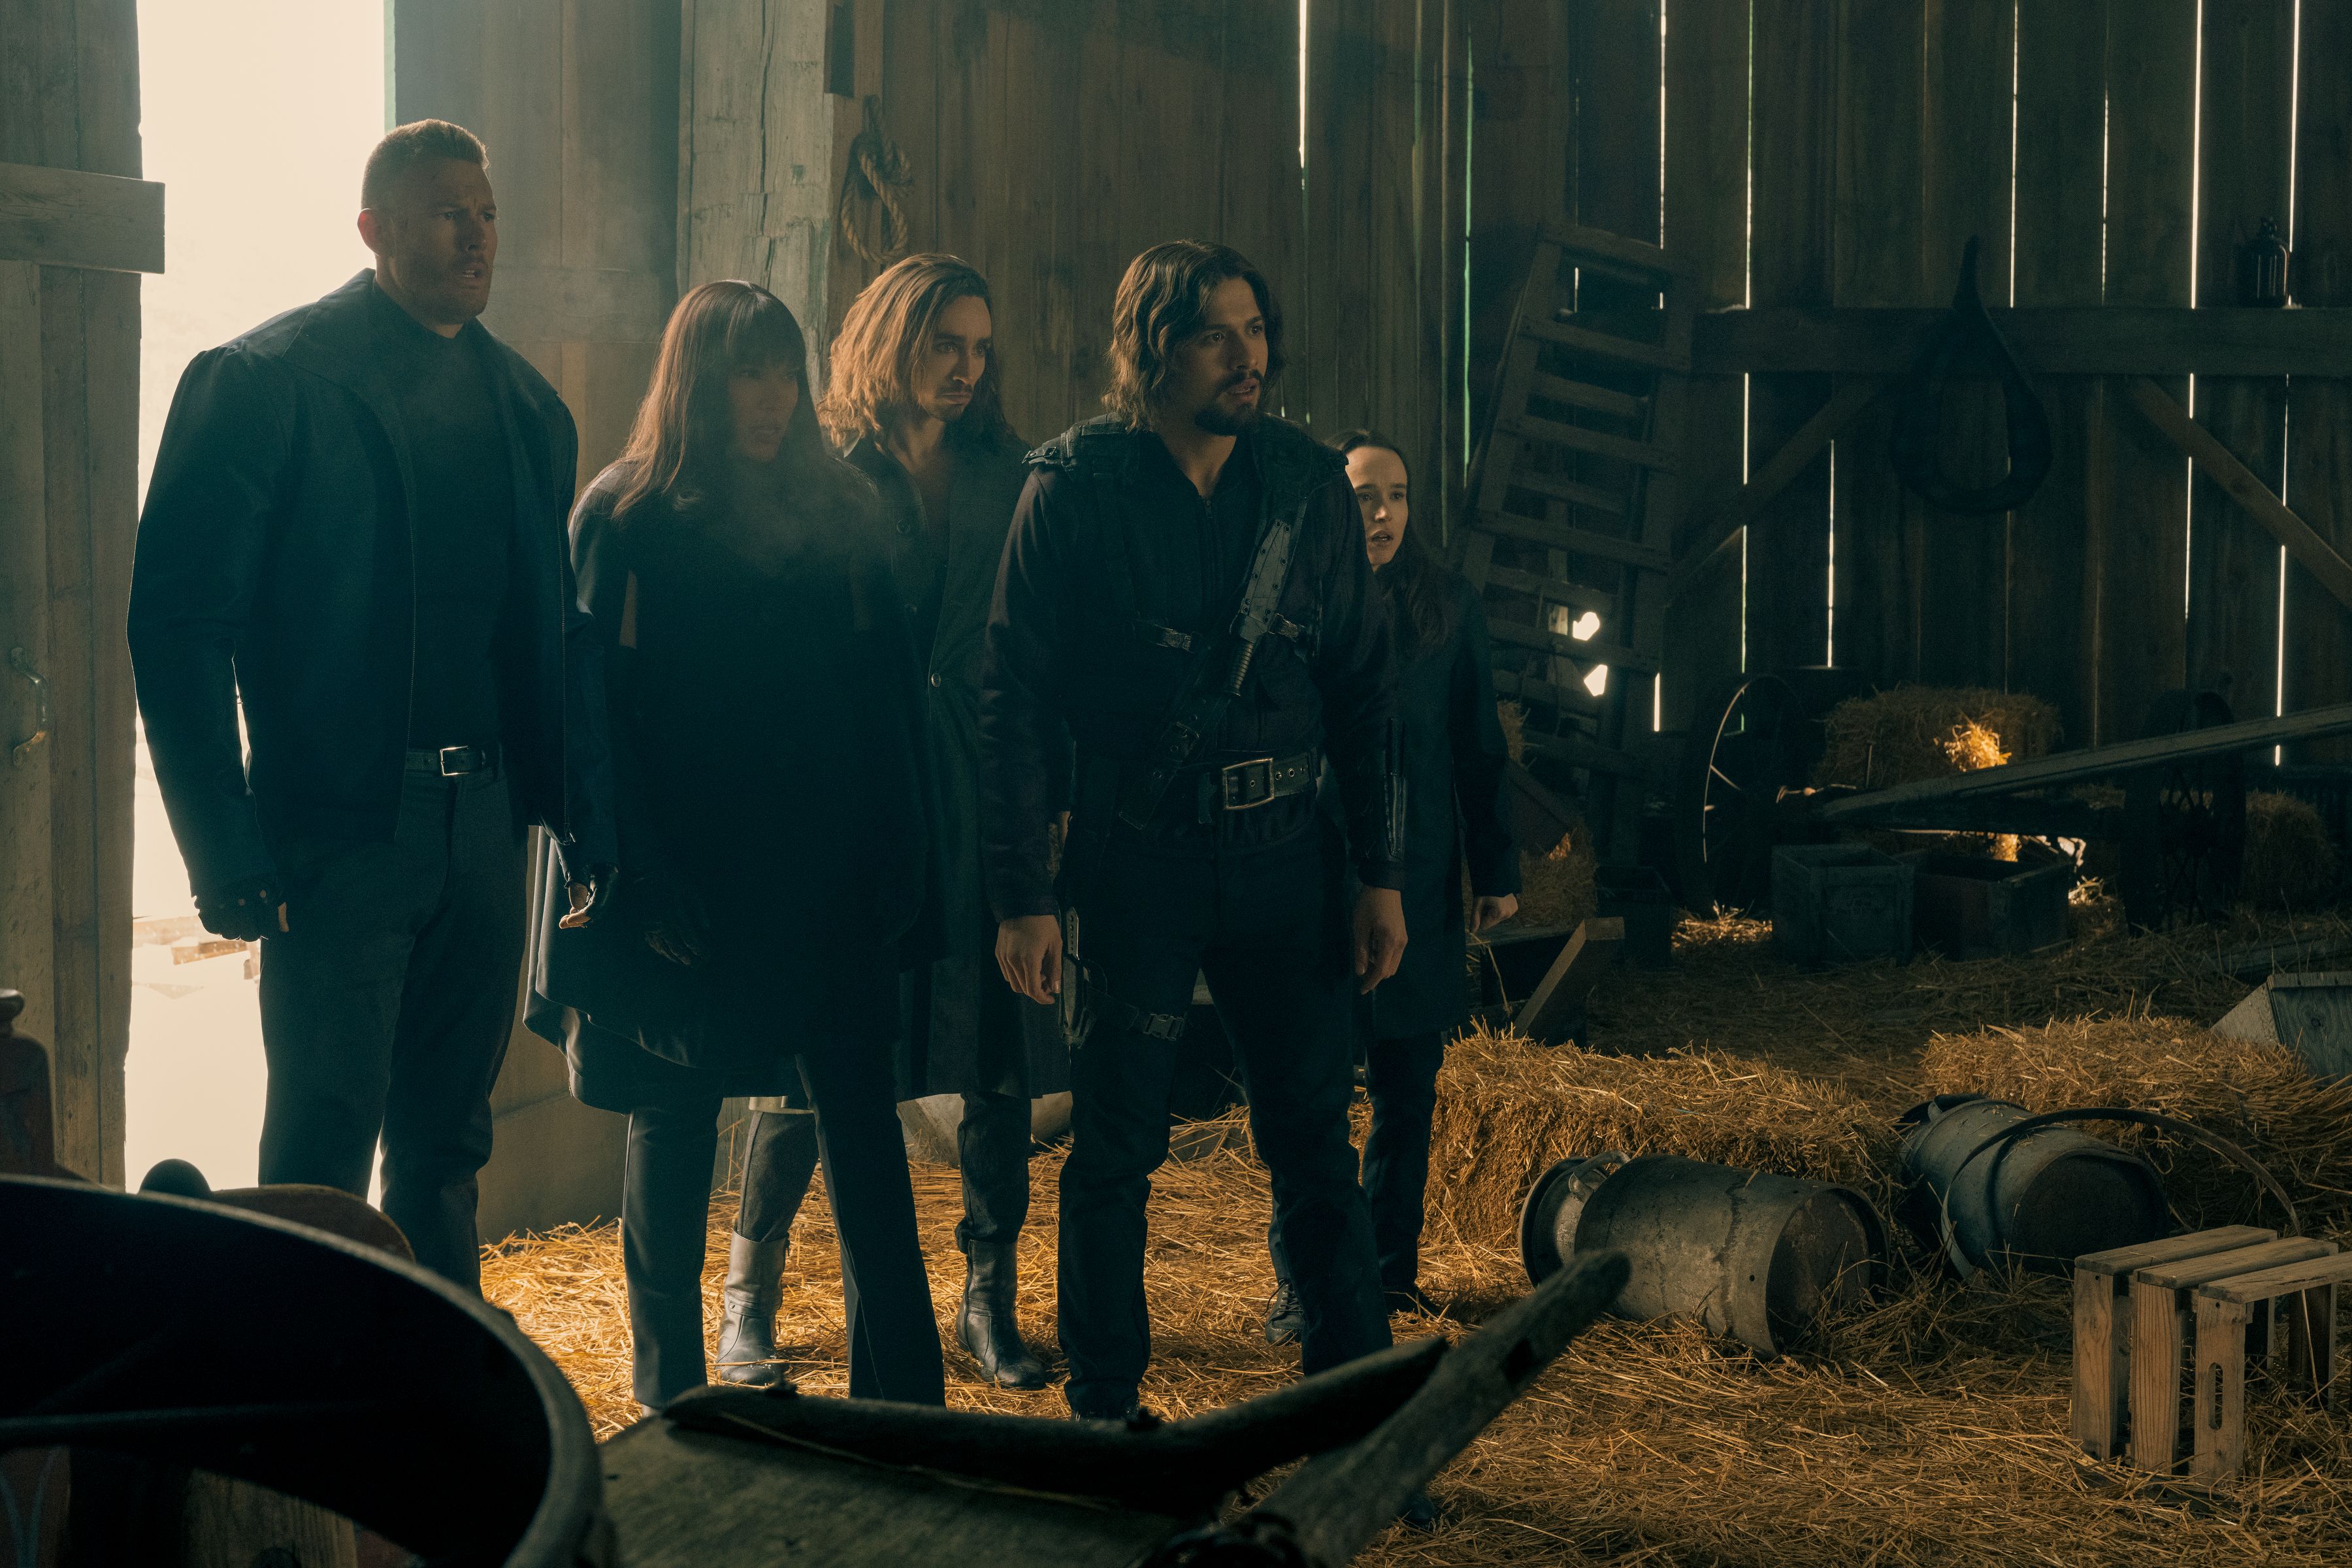 tv show, the umbrella academy, allison hargreeves, david castañeda, diego hargreeves, elliot page, emmy raver lampman, klaus hargreeves, luther hargreeves, robert sheehan, tom hopper, vanya hargreeves